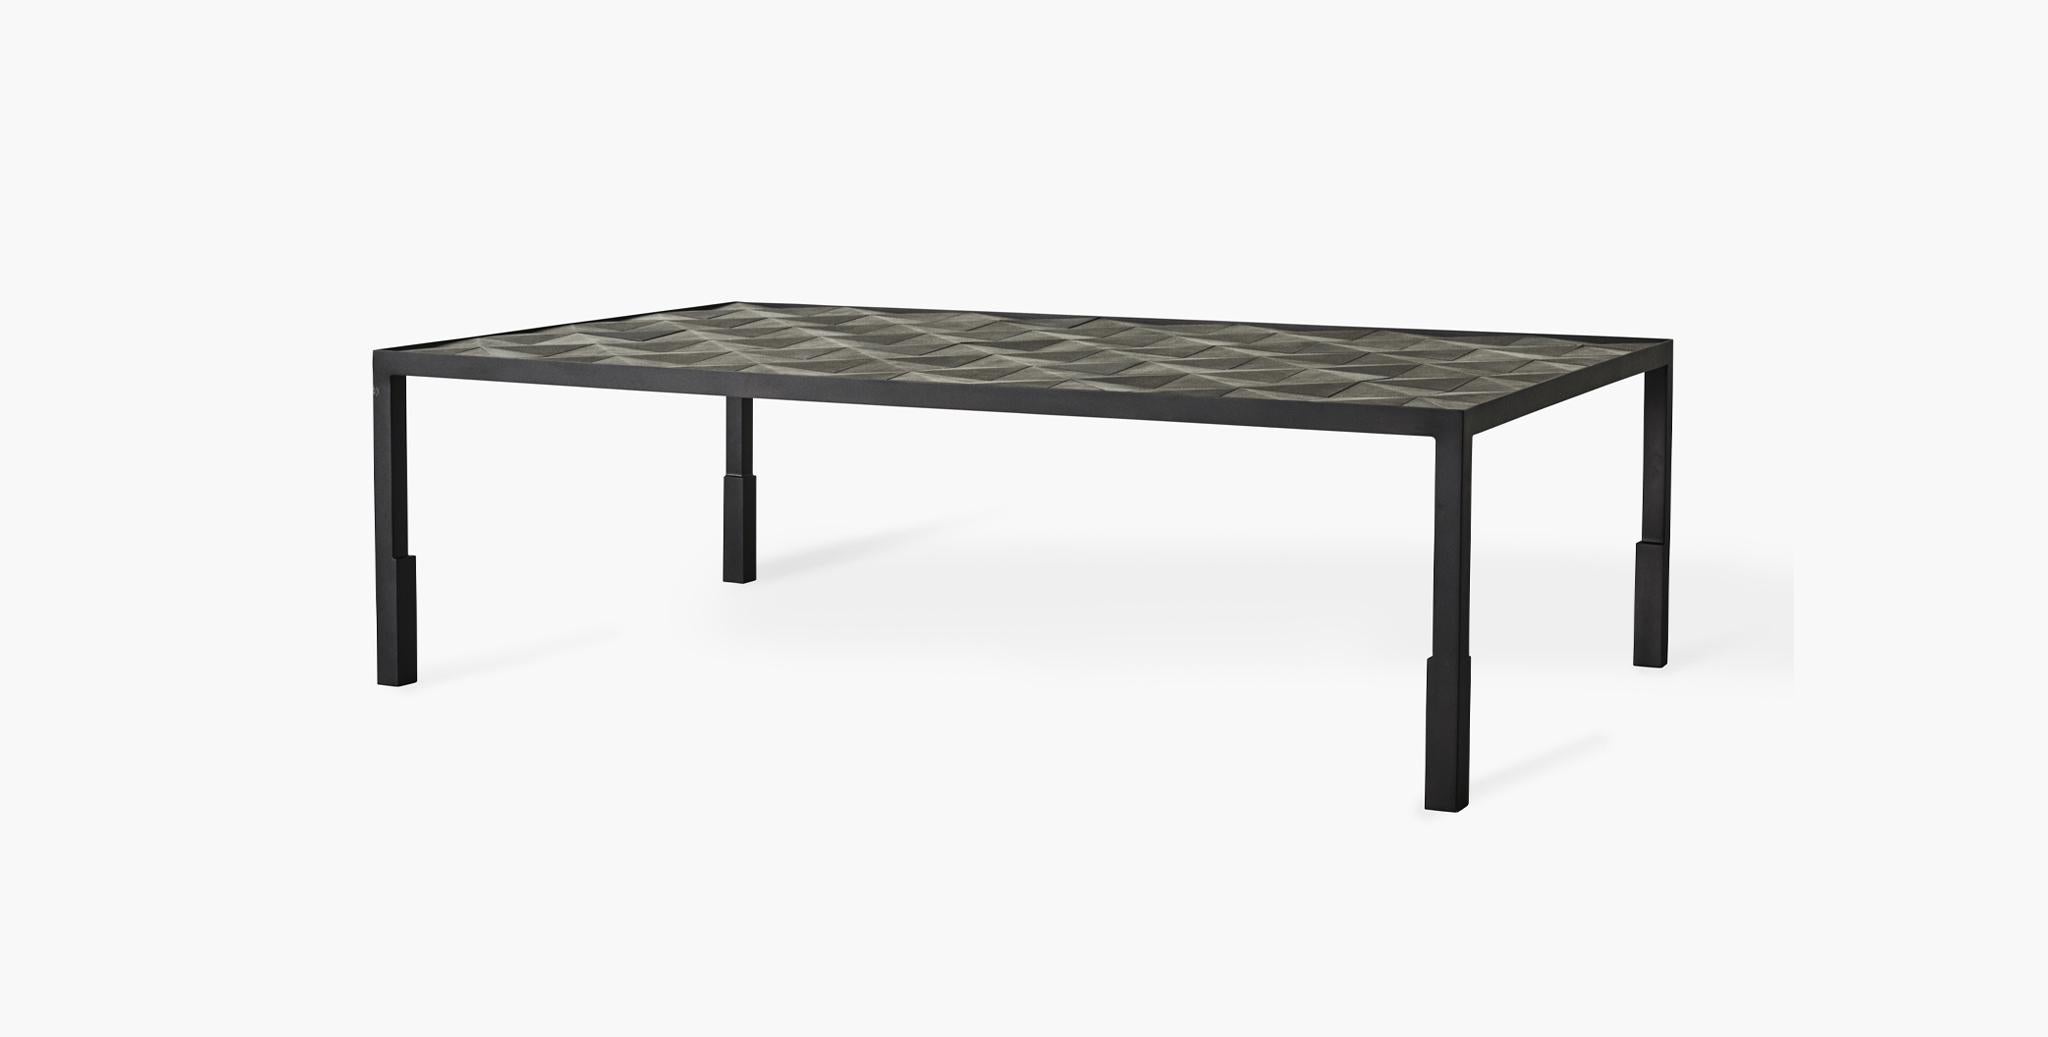 Hand-tiled in leather with an understated geometric pattern in monochrome charcoals and greys, our Calder Coffee Table adds a layered point of interest to your decor. A black metal frame provides a subtle yet substantial base. Tray not included.